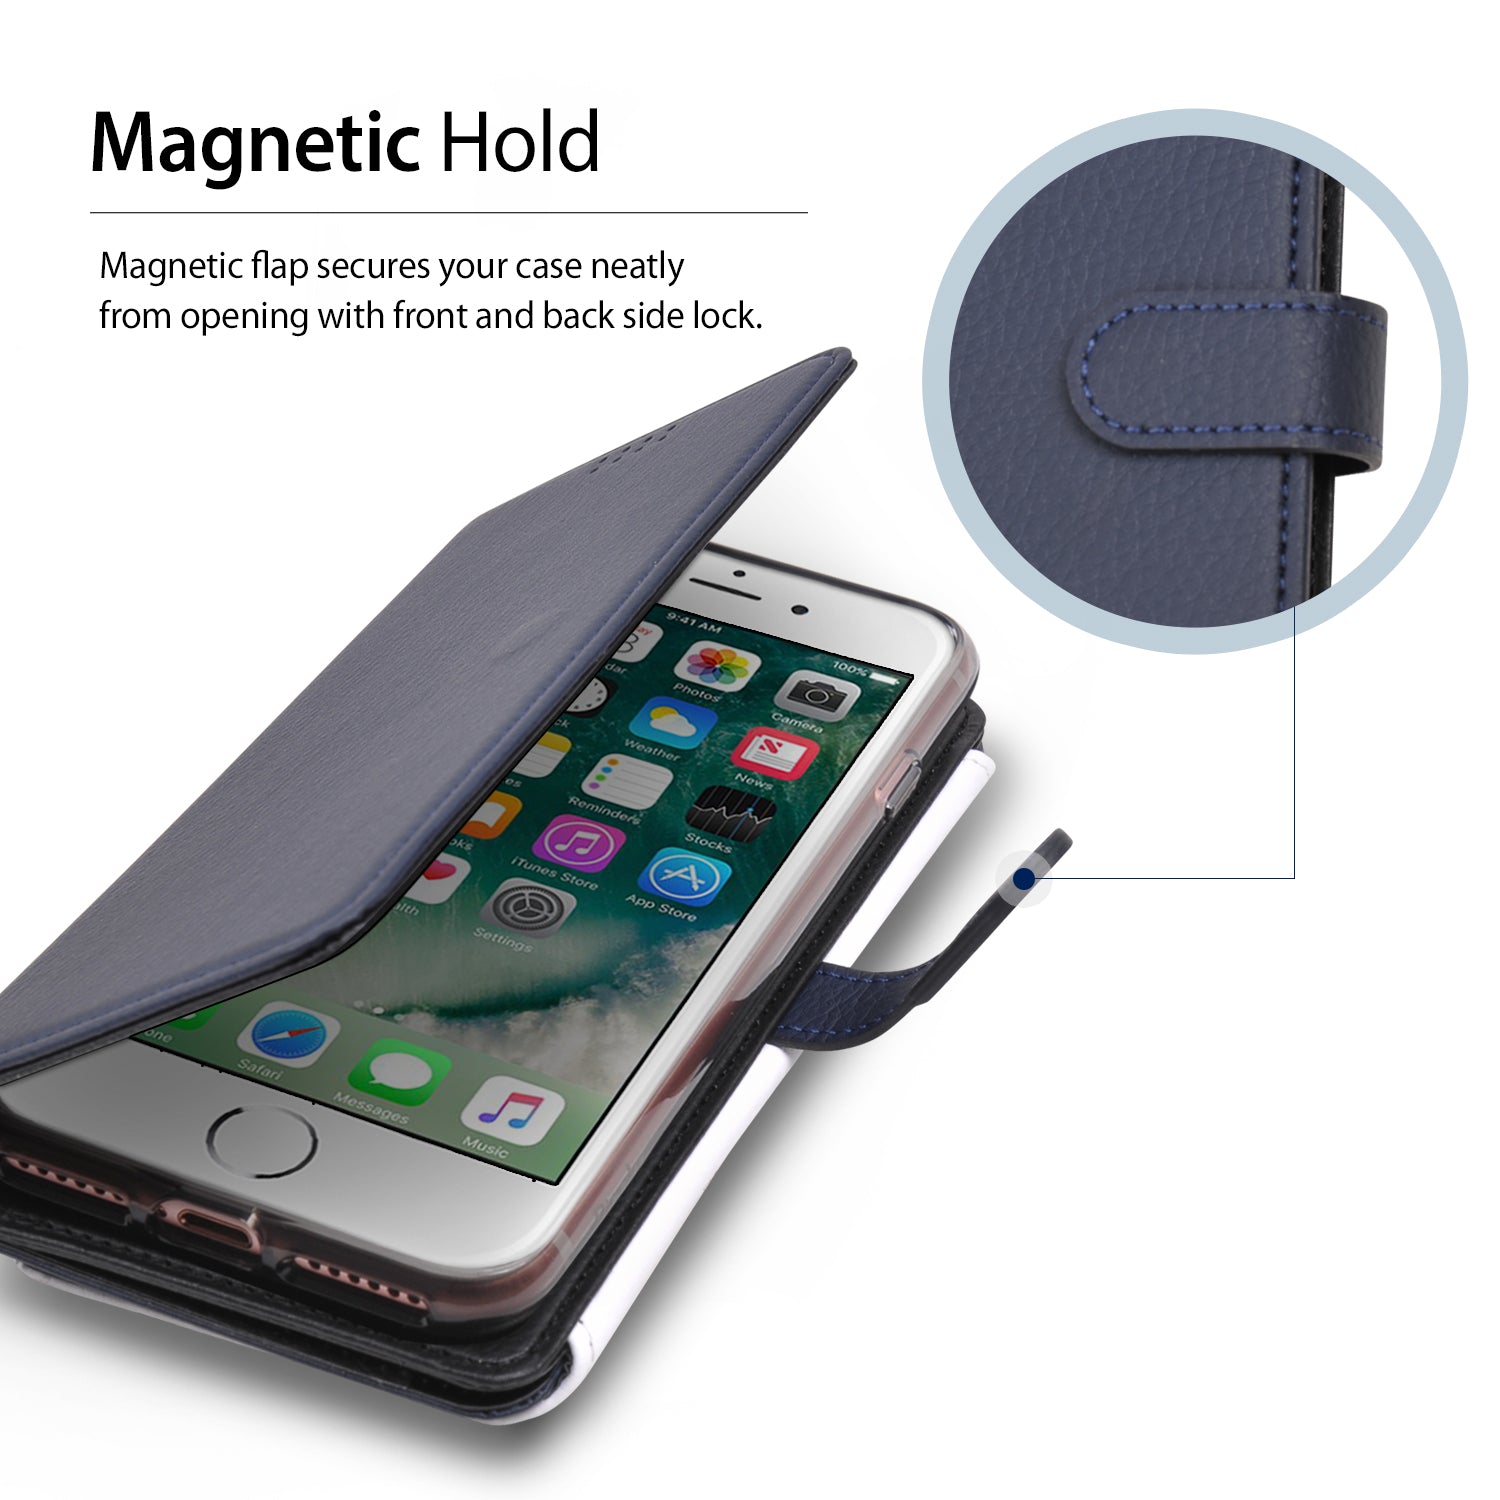 iPhone 7 Case | Wallet - Magnetic Hold. Magnetic flap secures your case neatly from opening with front and back side lock.